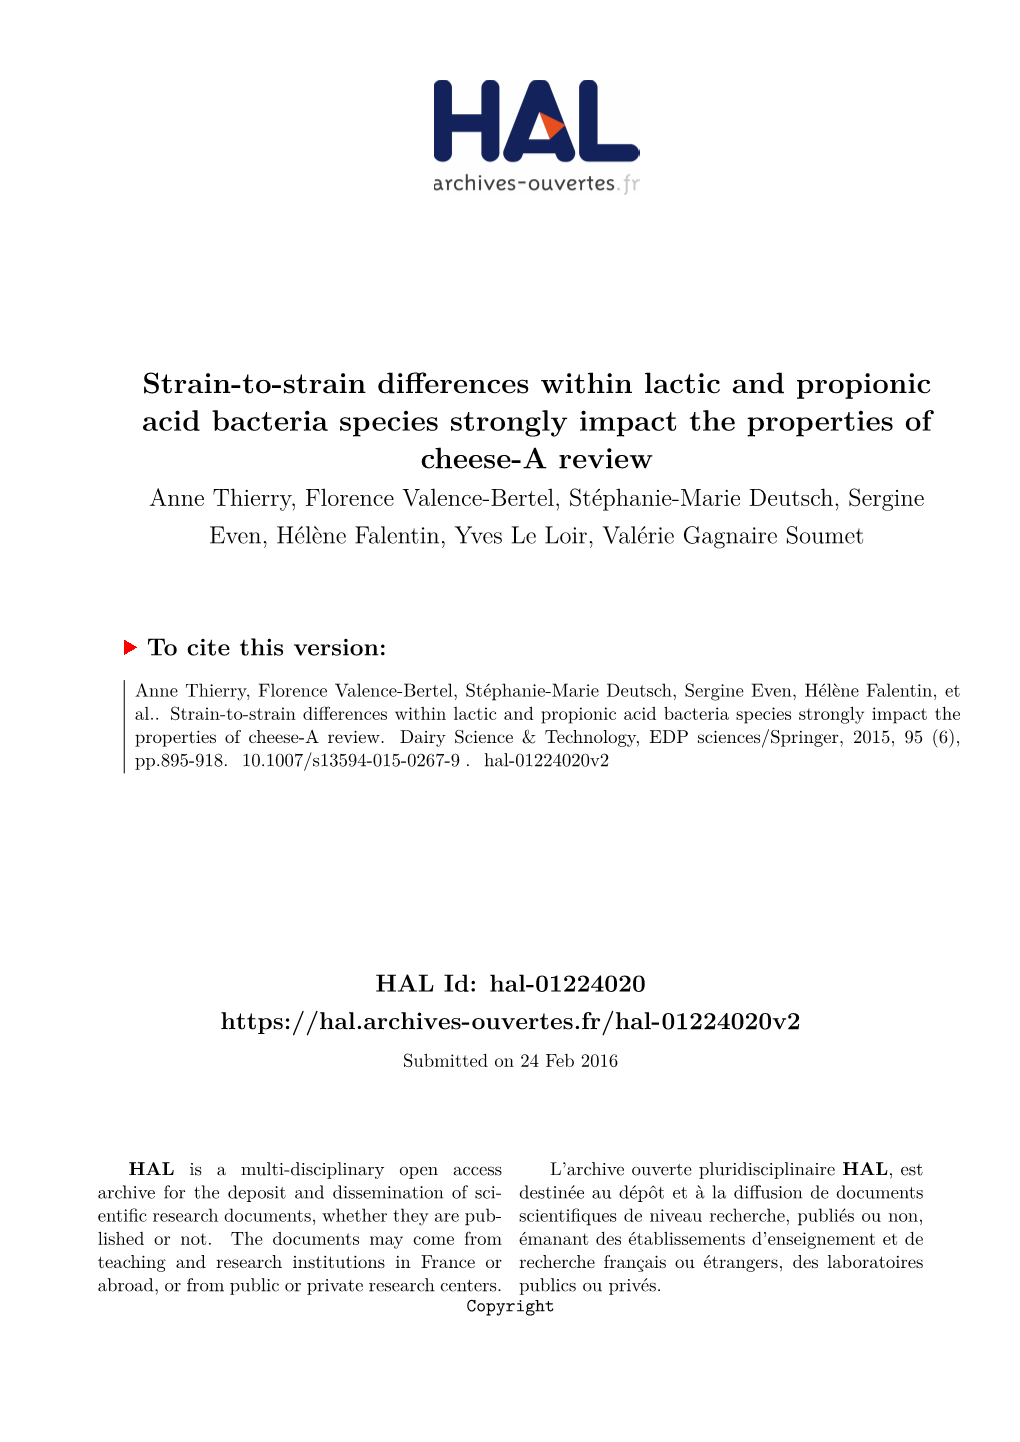 Strain-To-Strain Differences Within Lactic and Propionic Acid Bacteria